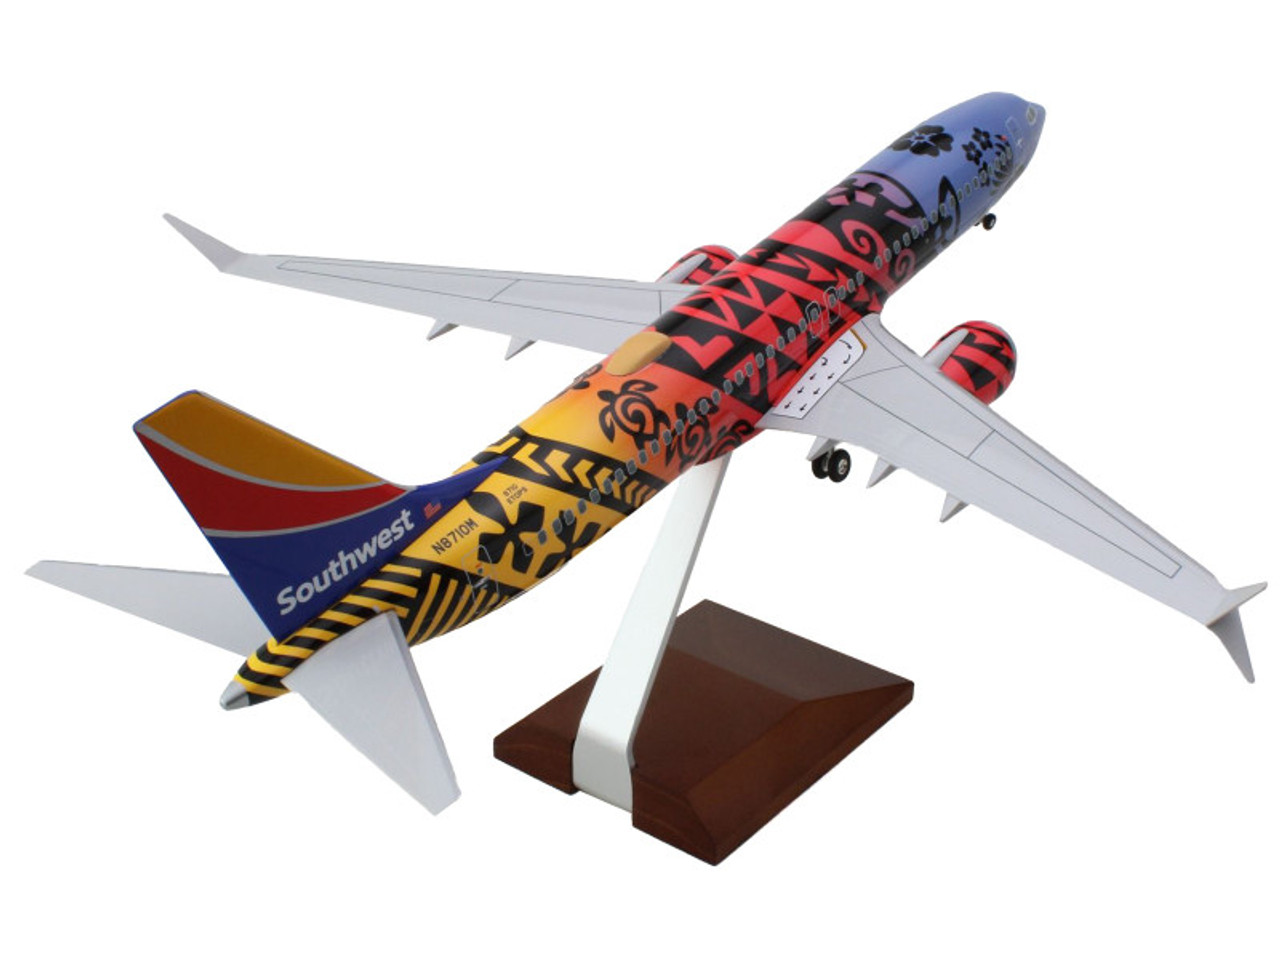 Boeing 737 MAX 8 Commercial Aircraft with Landing Gear "Southwest Airlines - Imua One" (N8710M) Hawaiian Livery (Snap-Fit) 1/100 Plastic Model by Skymarks